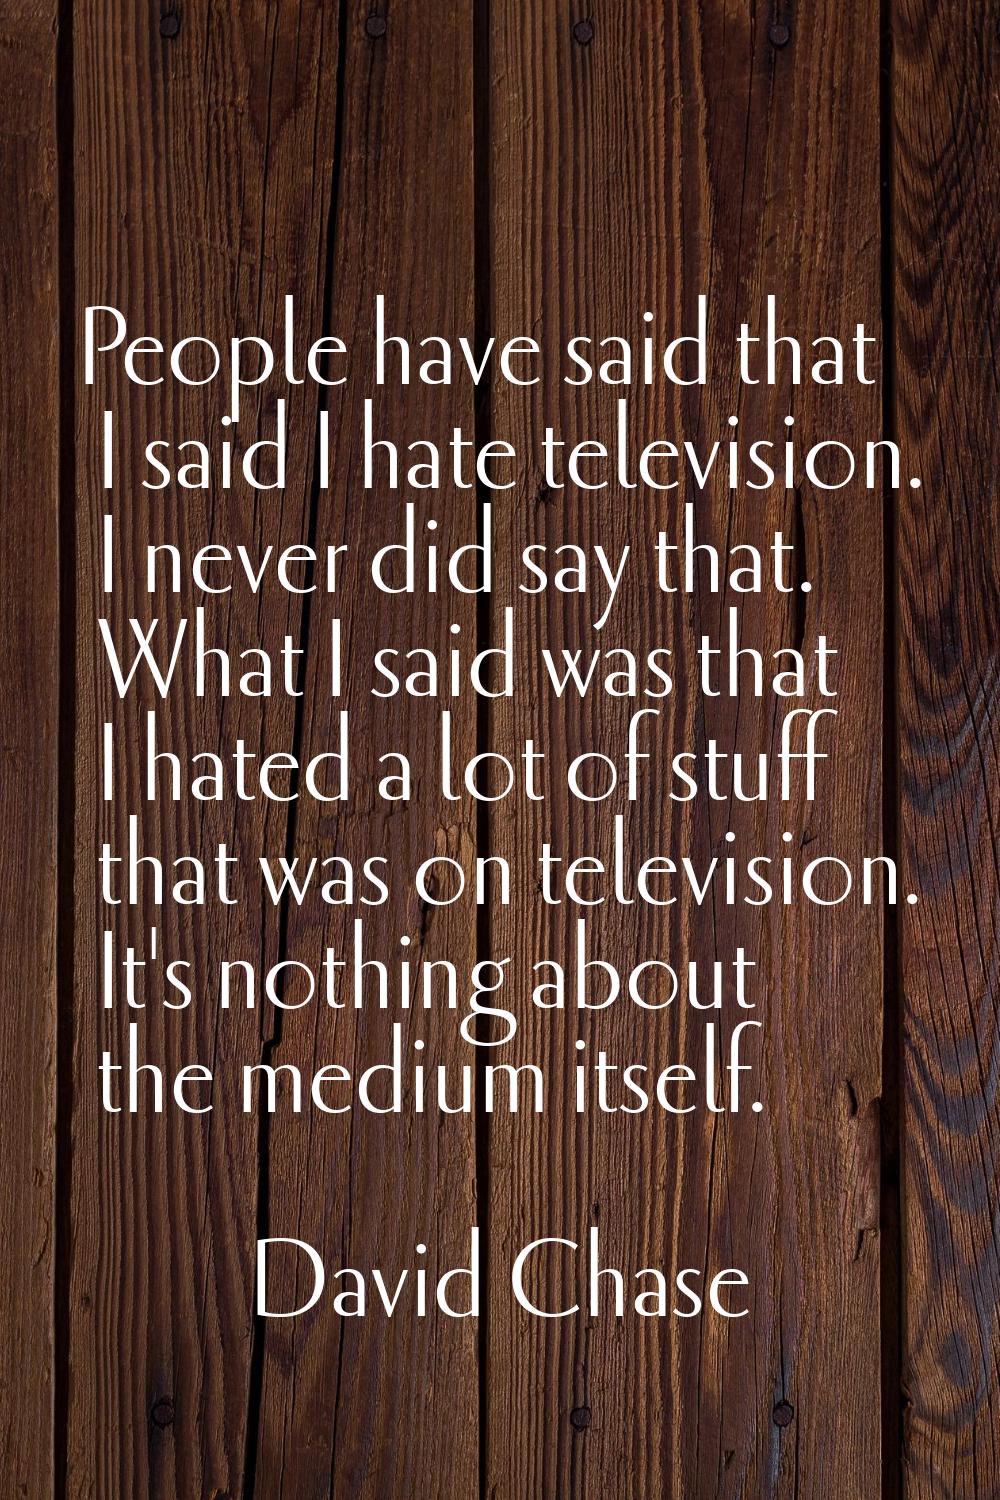 People have said that I said I hate television. I never did say that. What I said was that I hated 